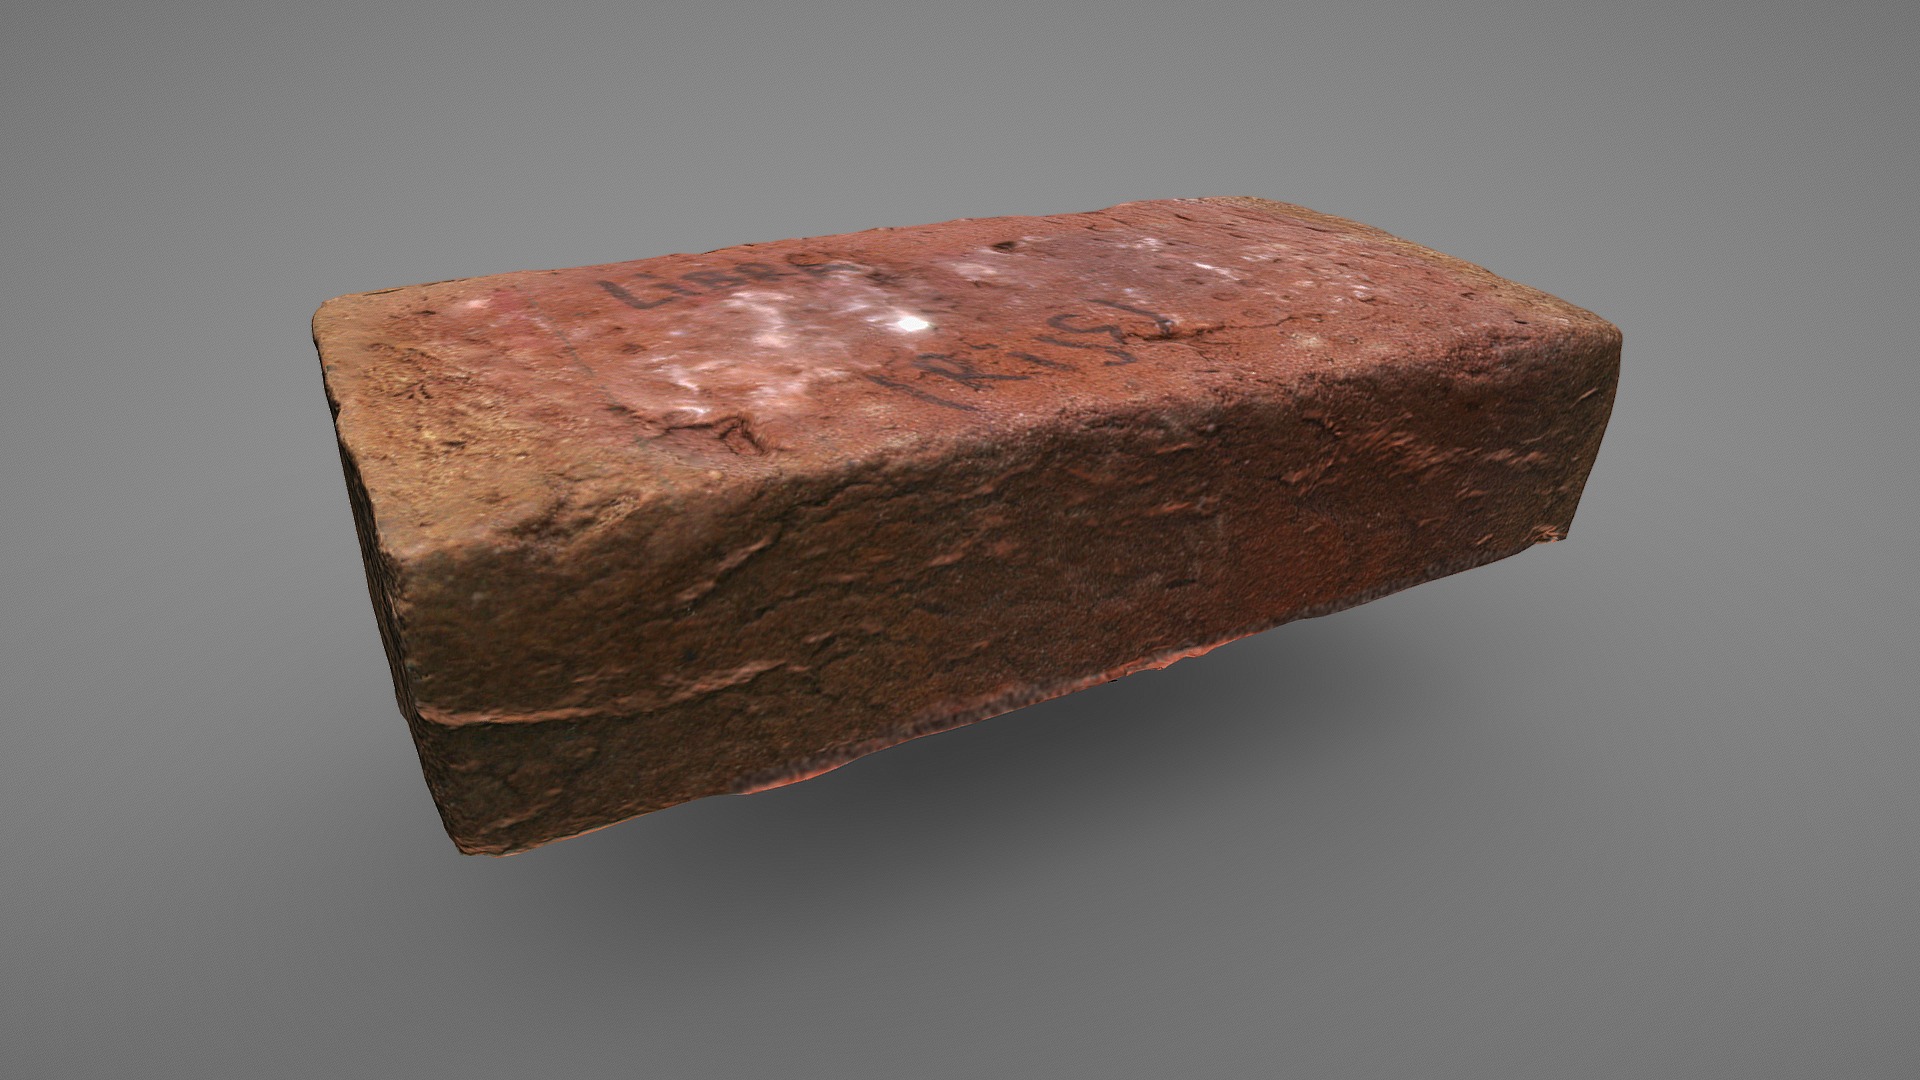 3D model Brick Libra - This is a 3D model of the Brick Libra. The 3D model is about a brown stone with a dark background.